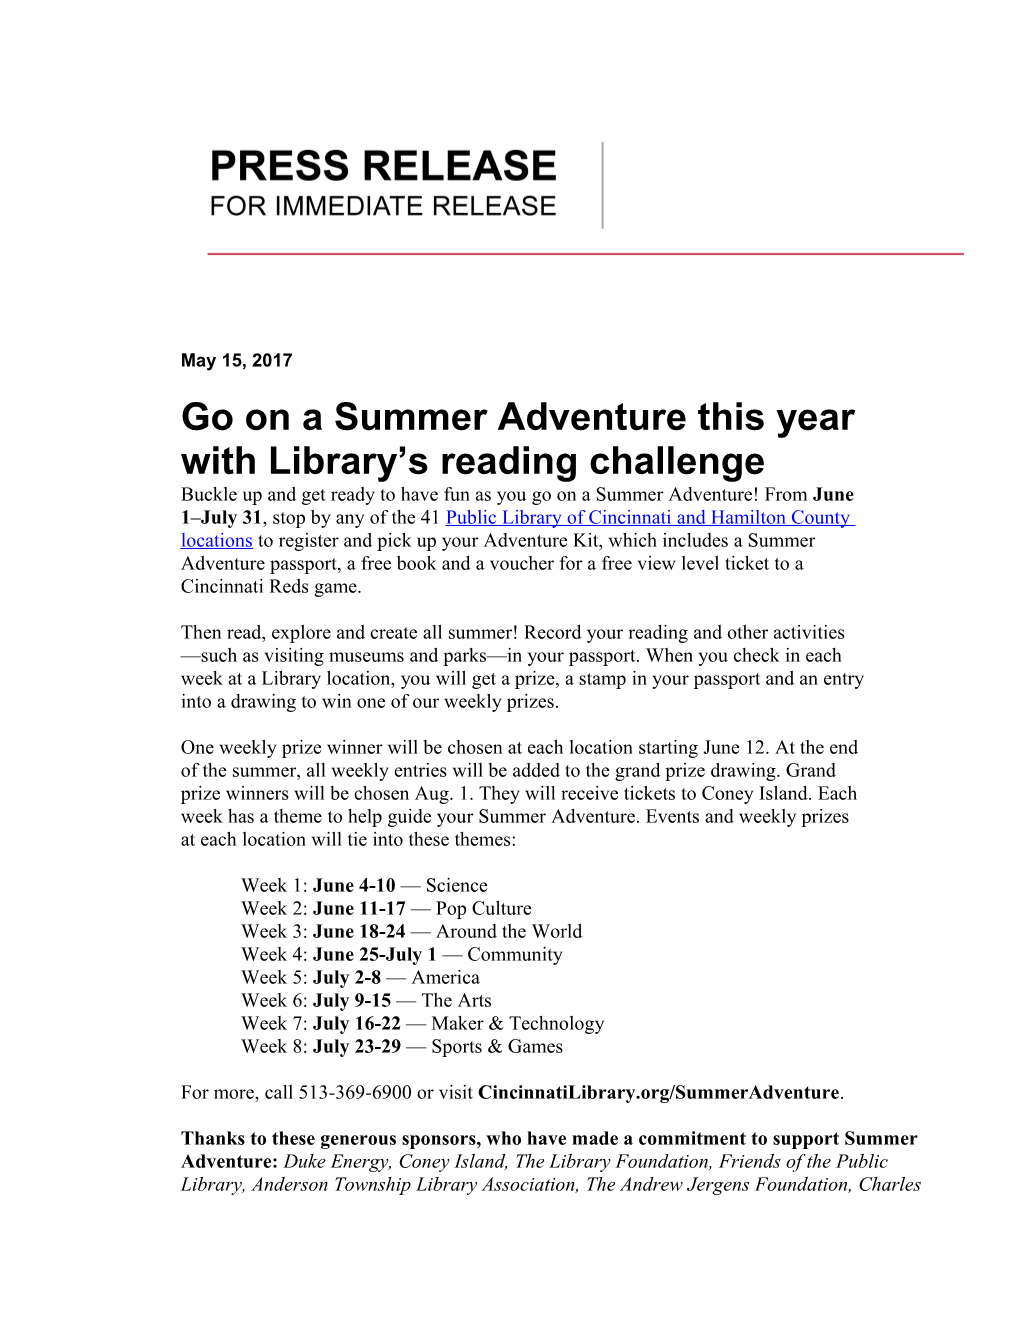 Go on a Summer Adventure This Year with Library S Reading Challenge